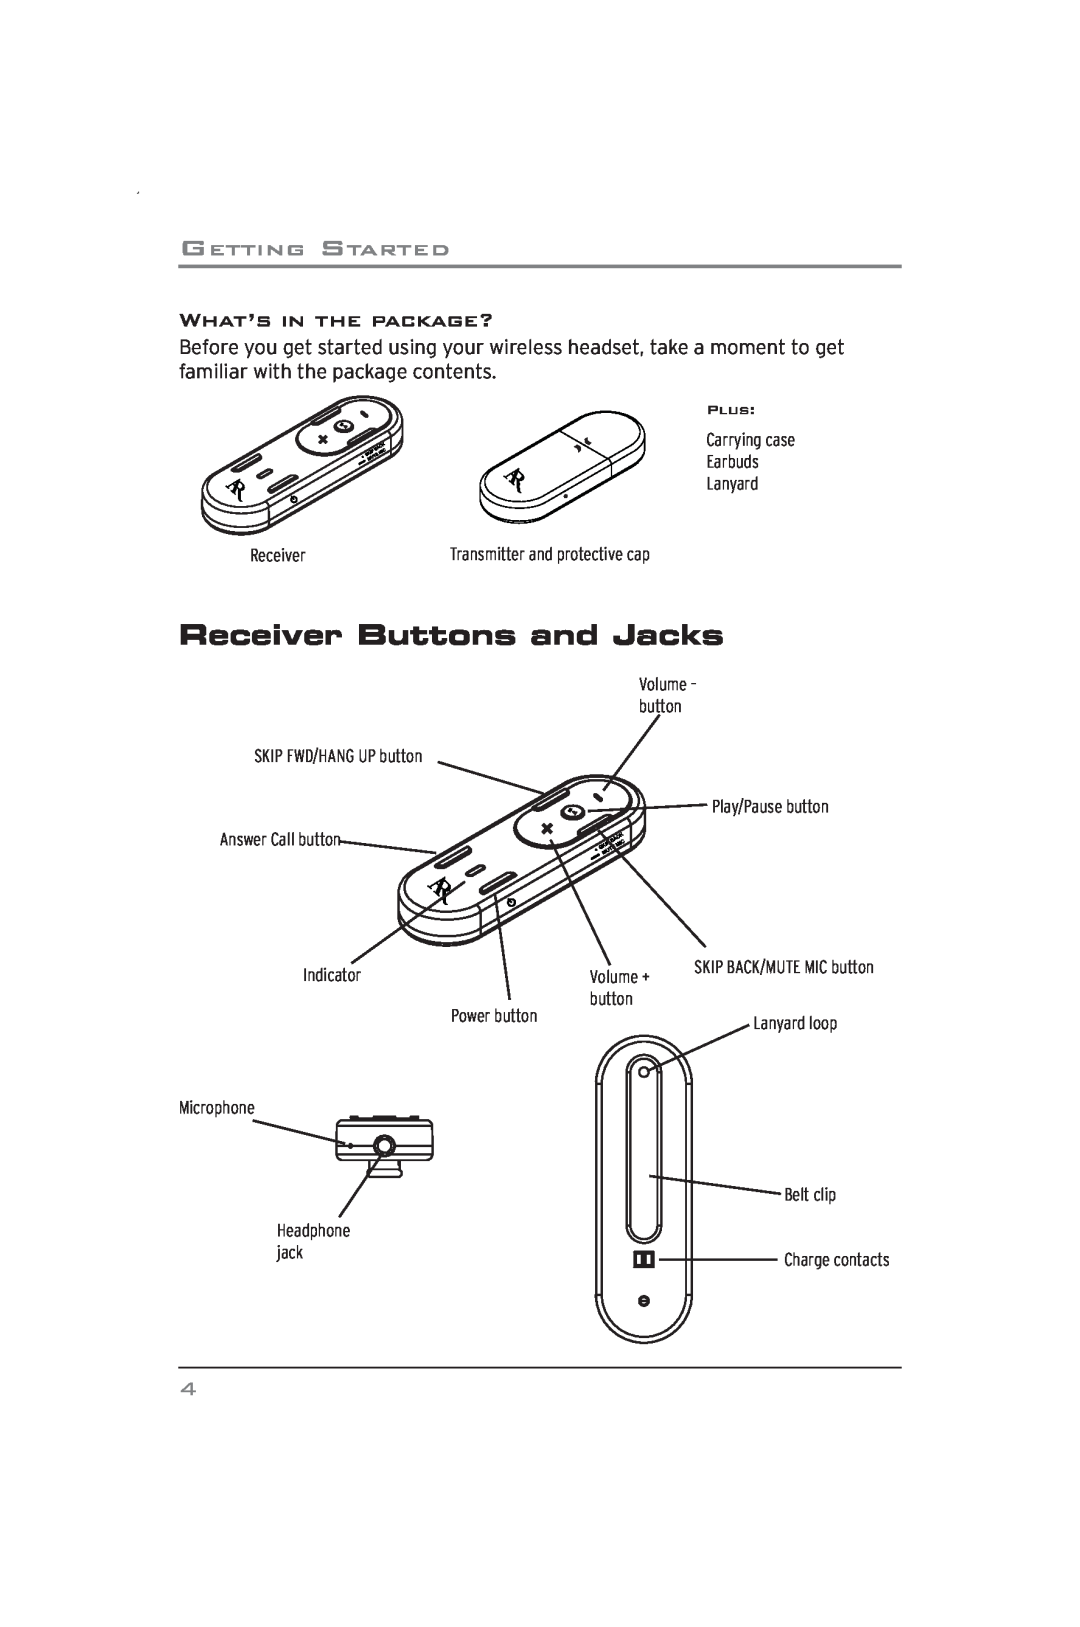 Acoustic Research ARWH2 user manual What’s in the package?, Receiver Buttons and Jacks, Getting Started 